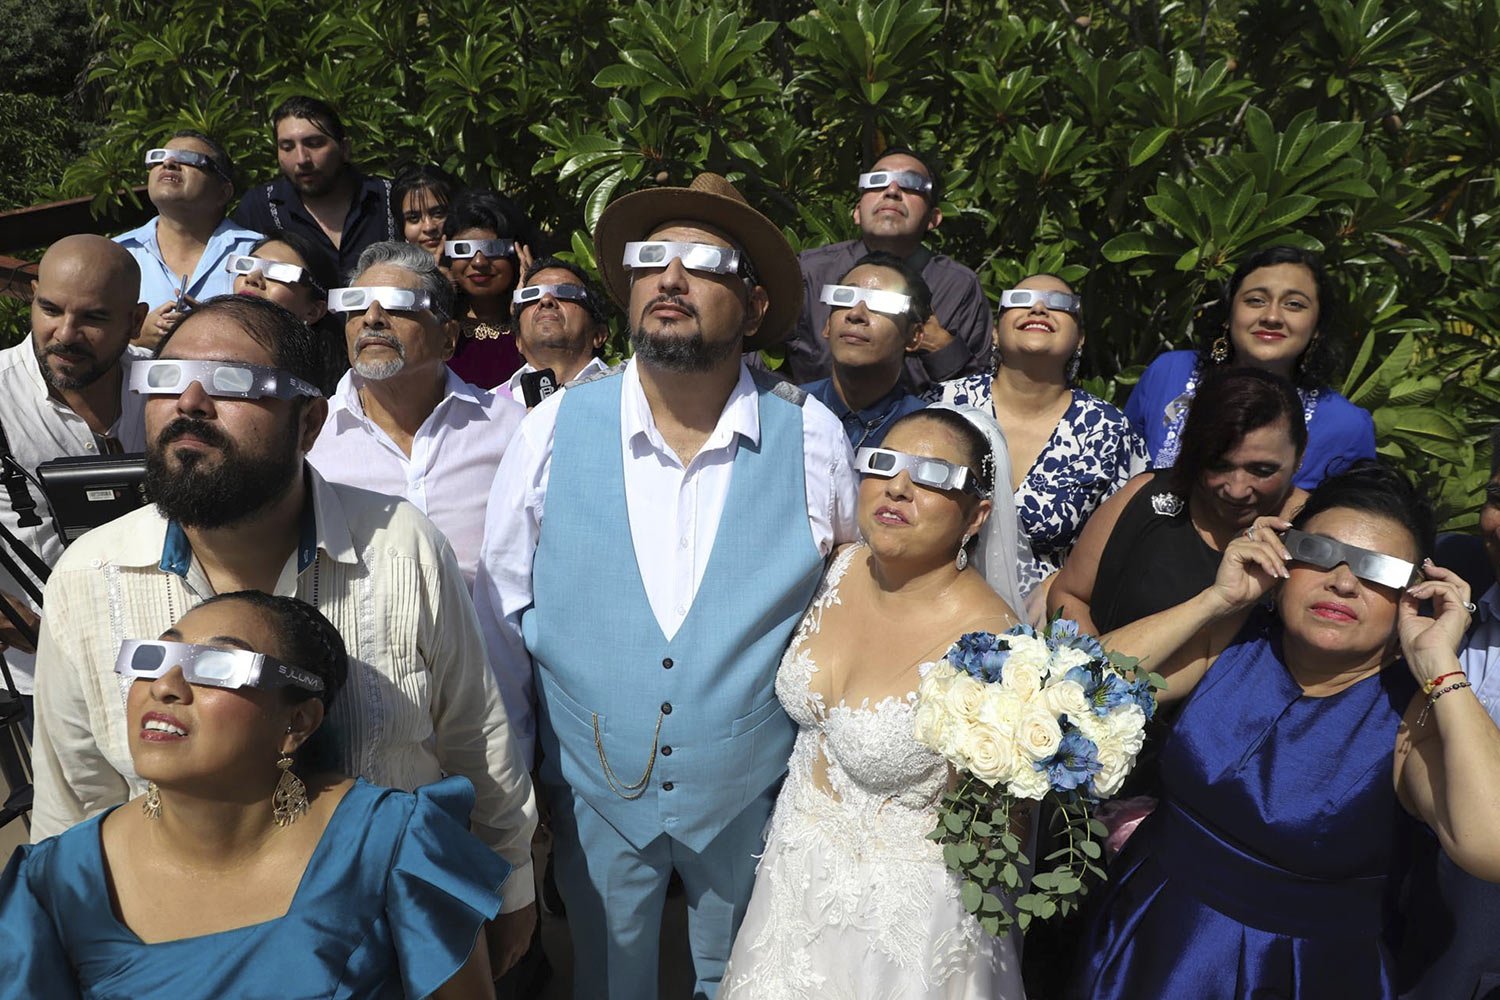  Isaac Medina, center, and Jazmin Gonzalez, center right, watch a "ring of fire" solar eclipse before their wedding ceremony in Merida, Mexico, Oct. 14, 2023. (AP Photo/Martin Zetina) 